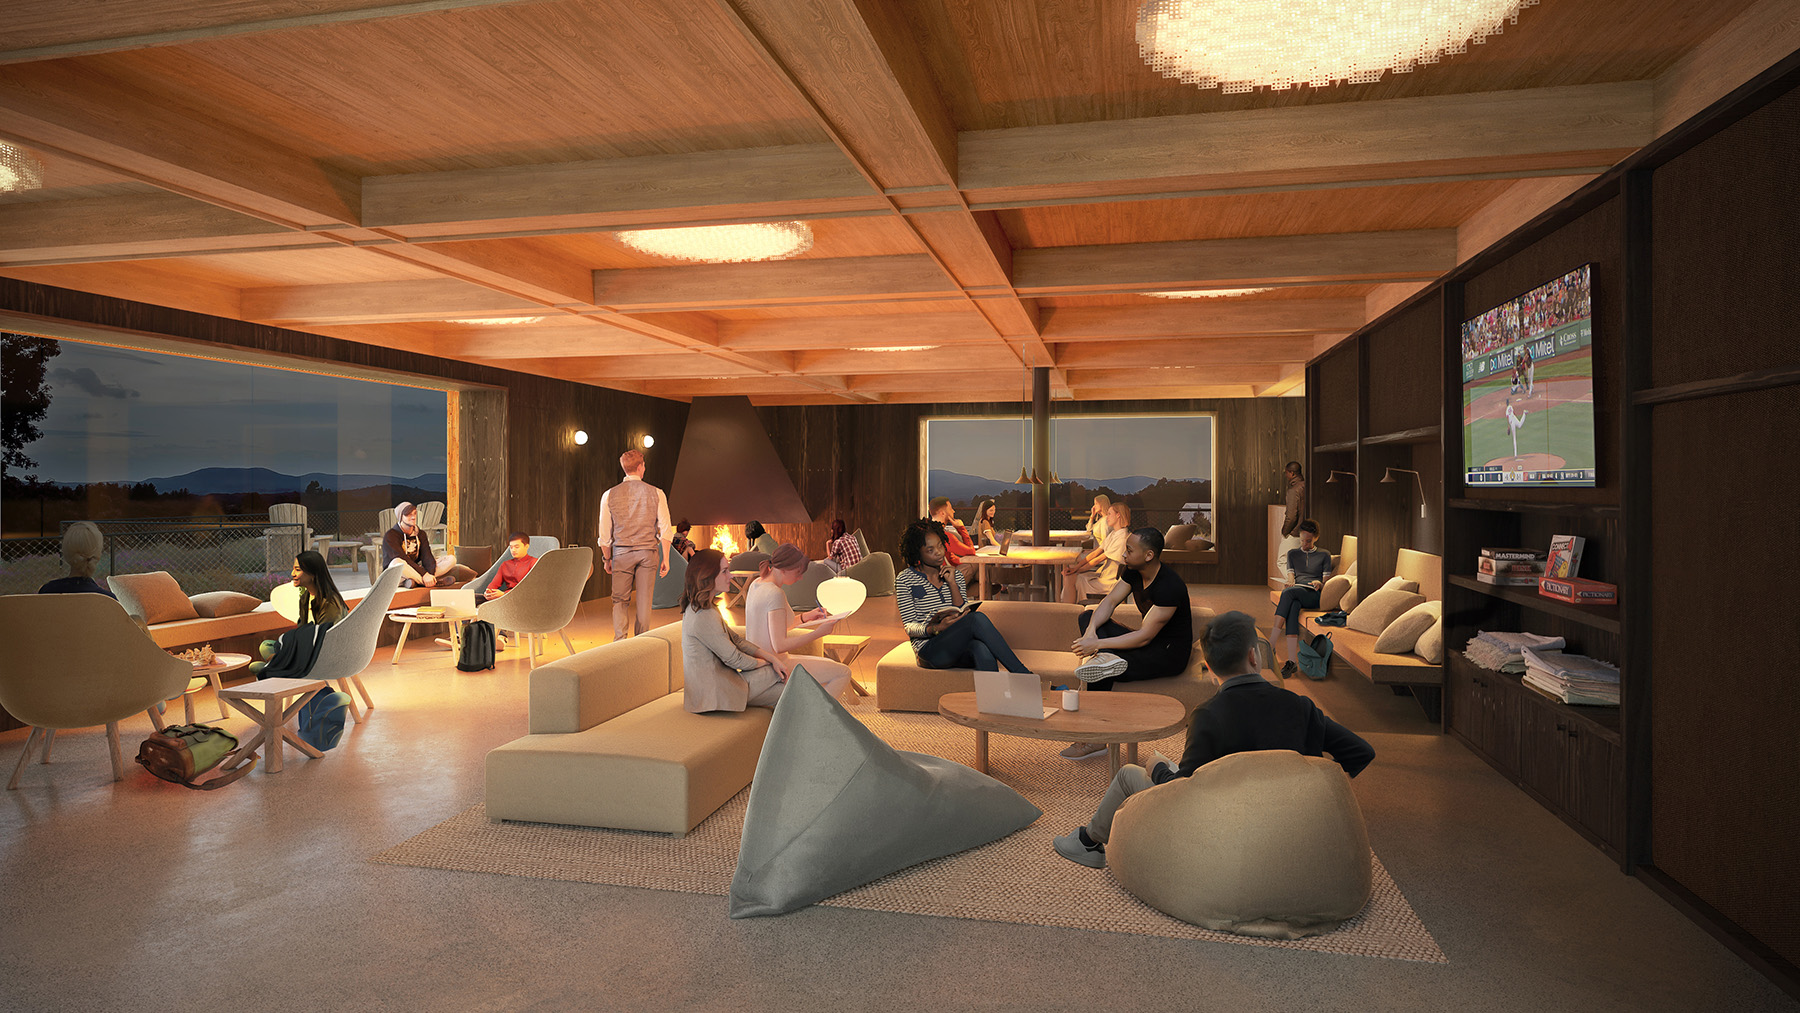 A rendering of a darkly lit lounge area with large windows looking out over hills